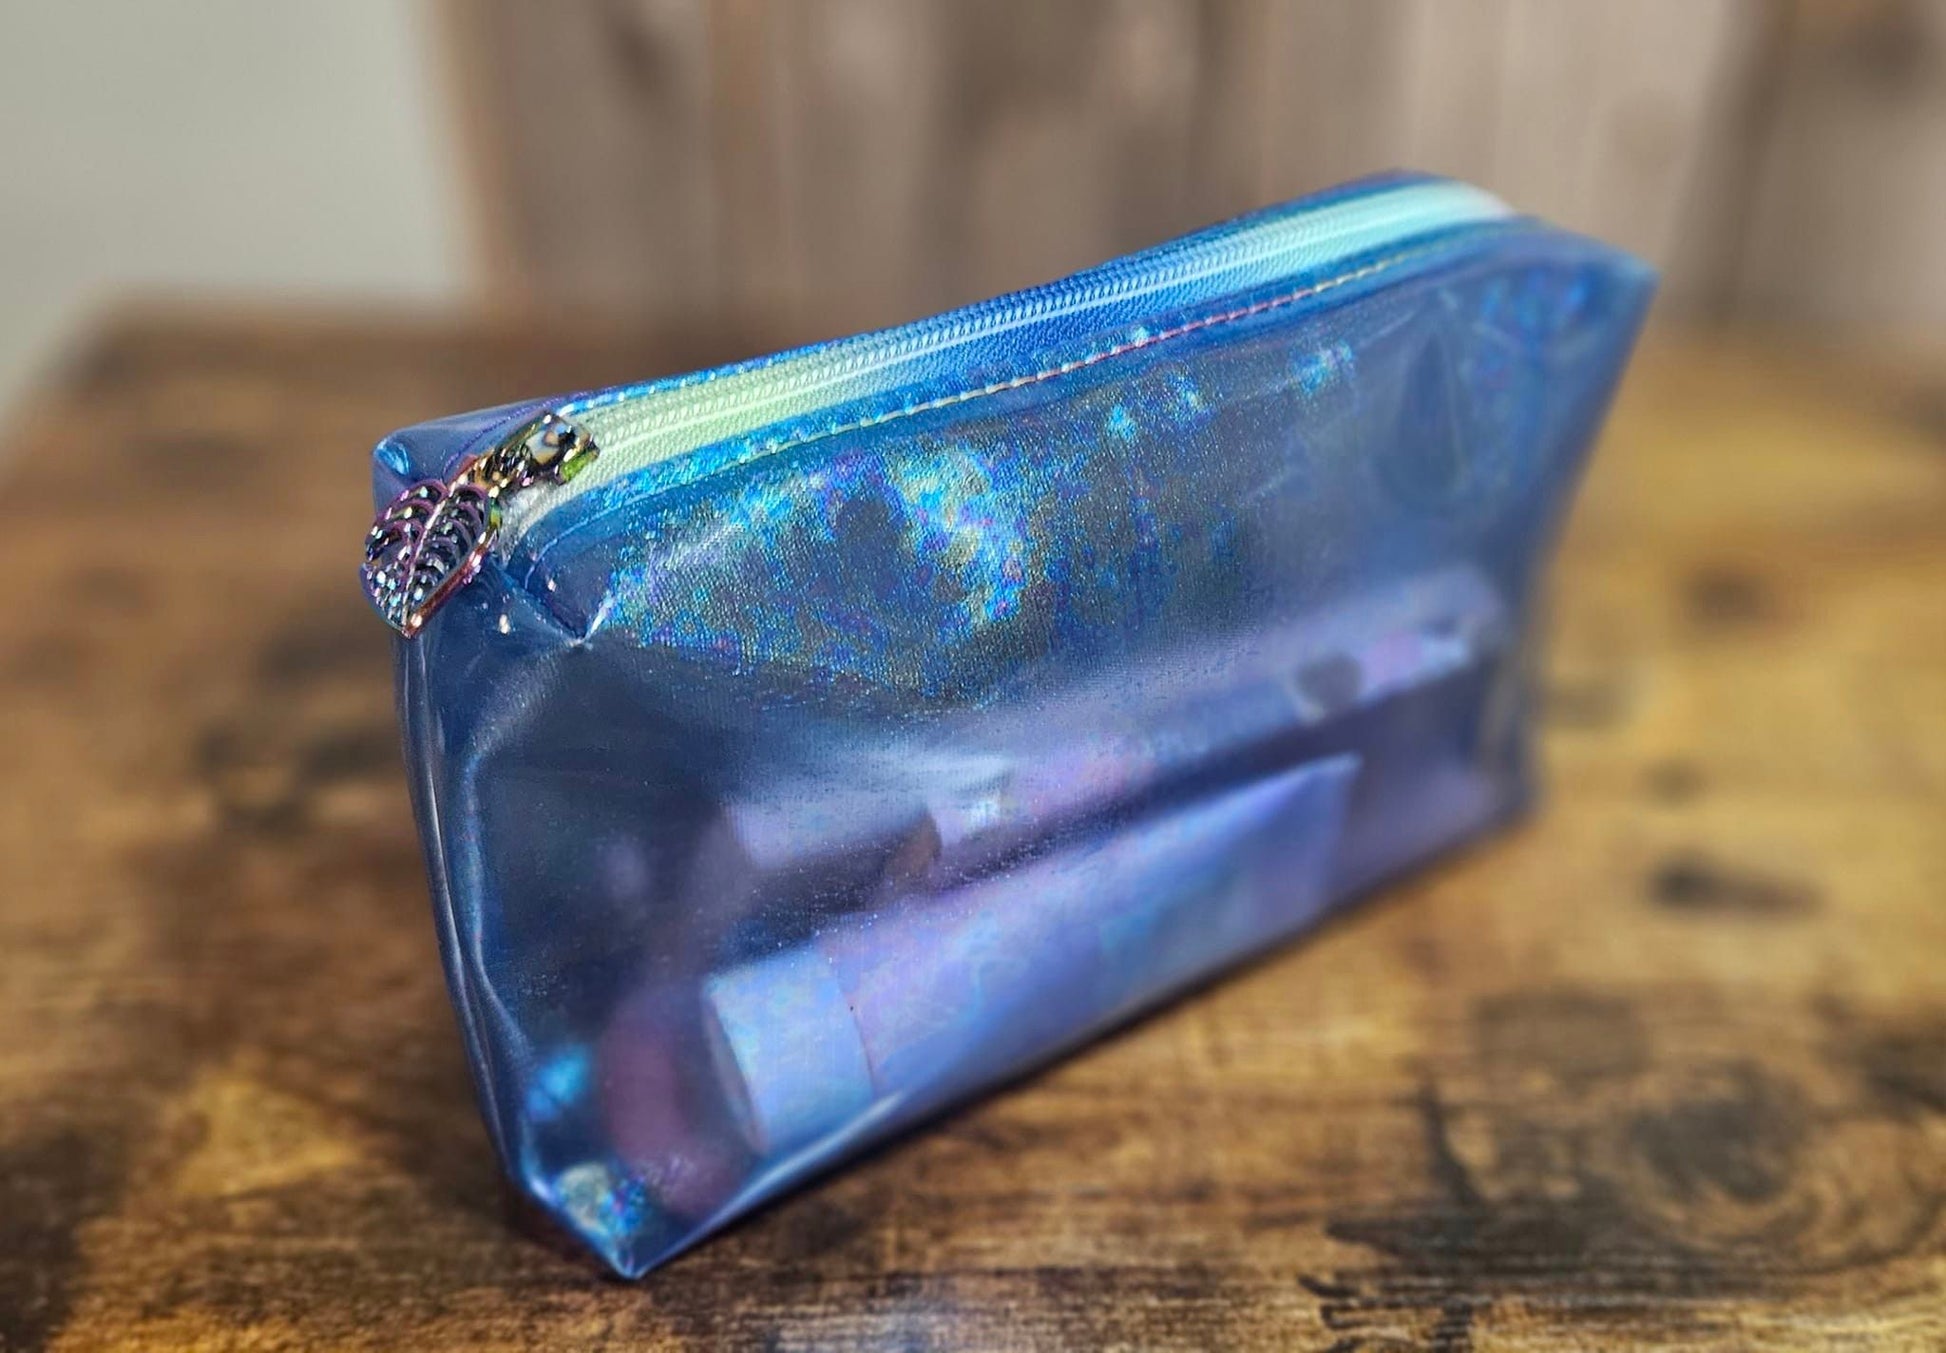 Crystal Clear Pencil Pouch - CCPP11 – Sewing Seeds of Love Studio